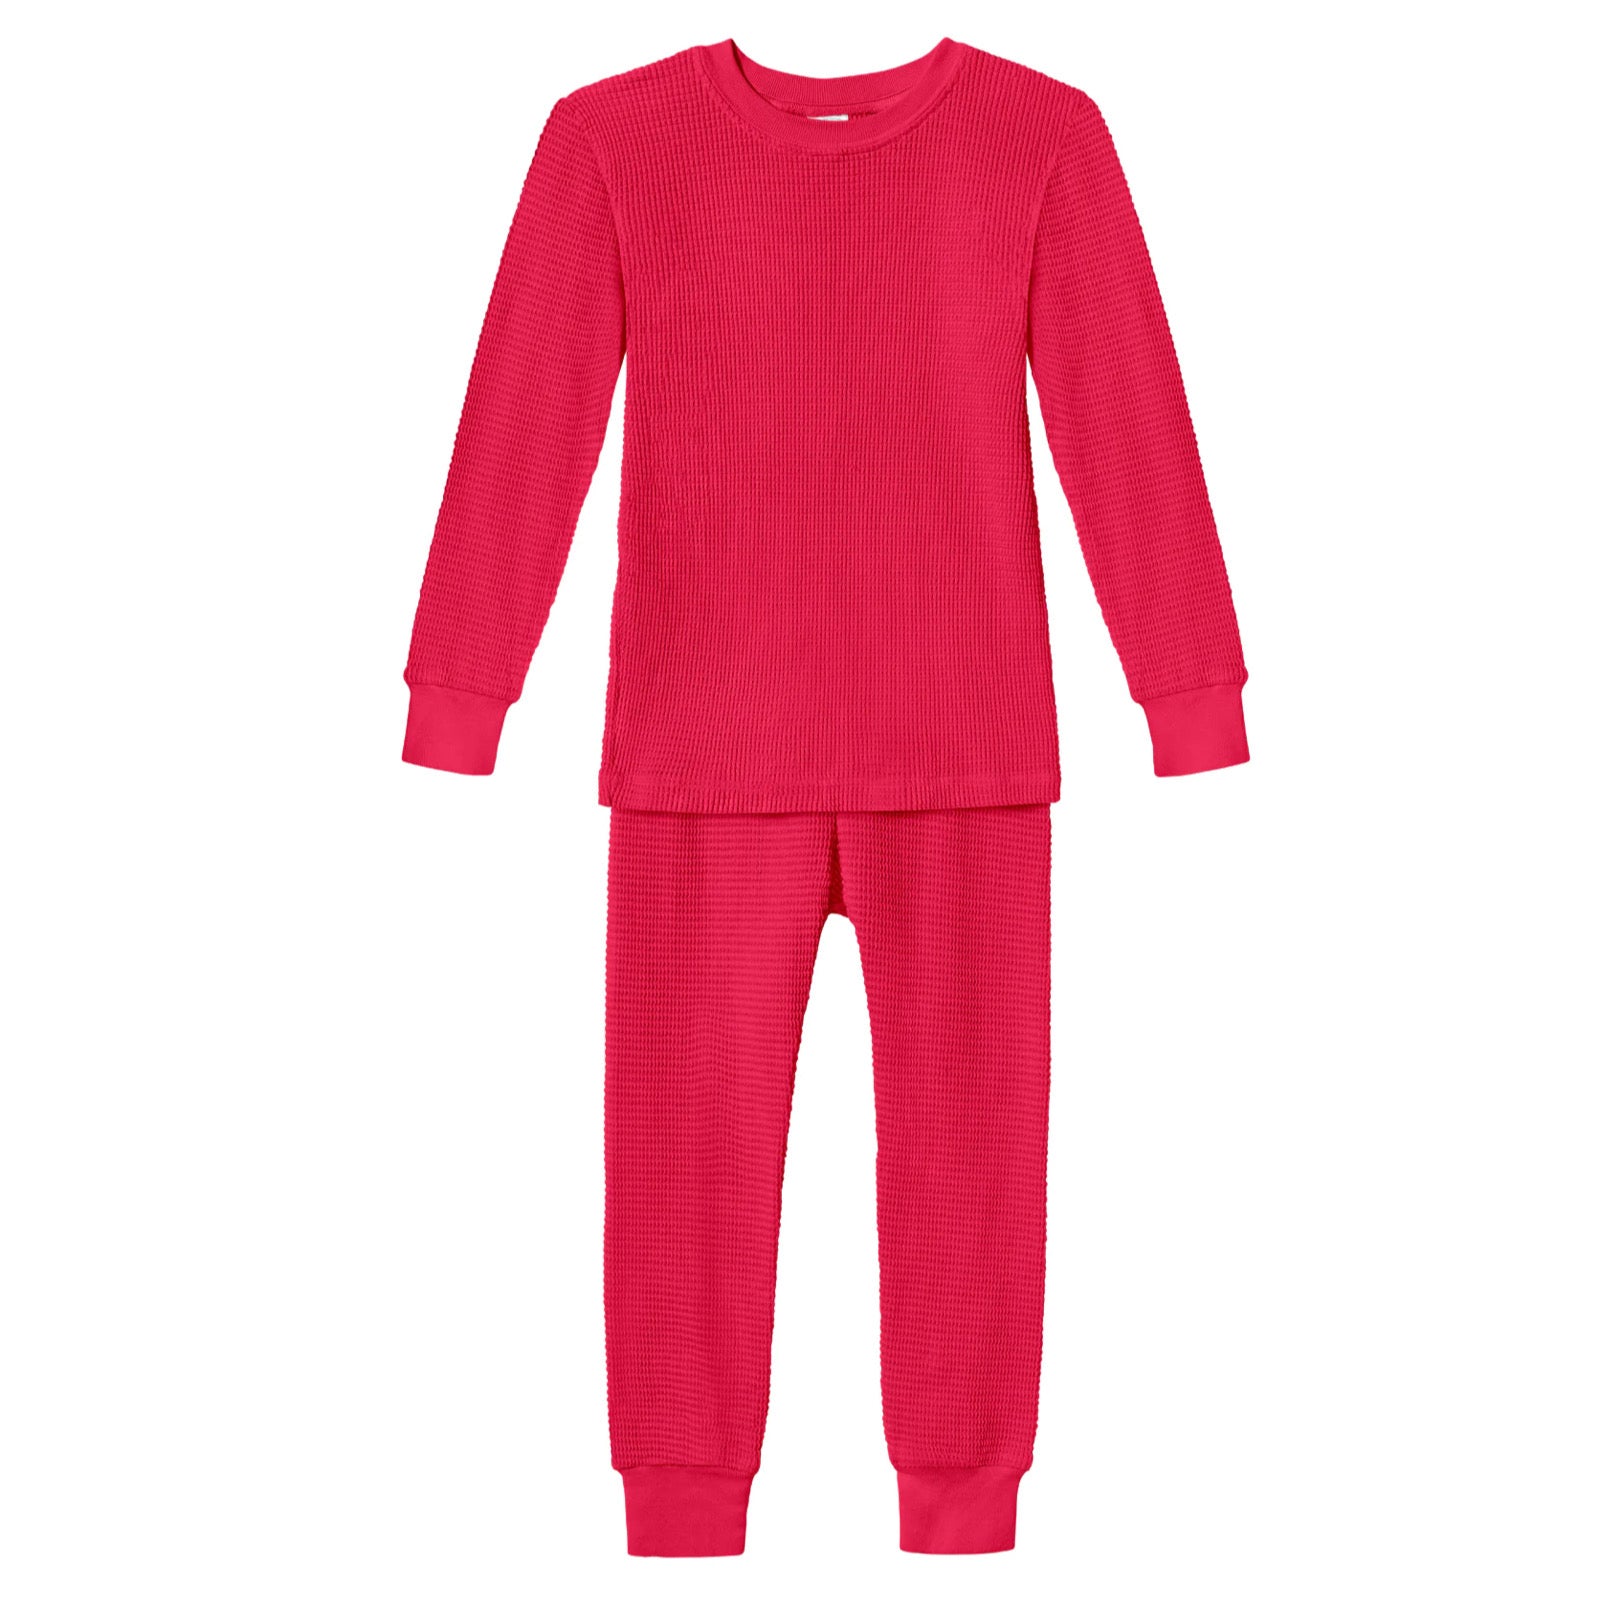 City Threads Usa-made Girls Soft 100% Cotton Solid Colored